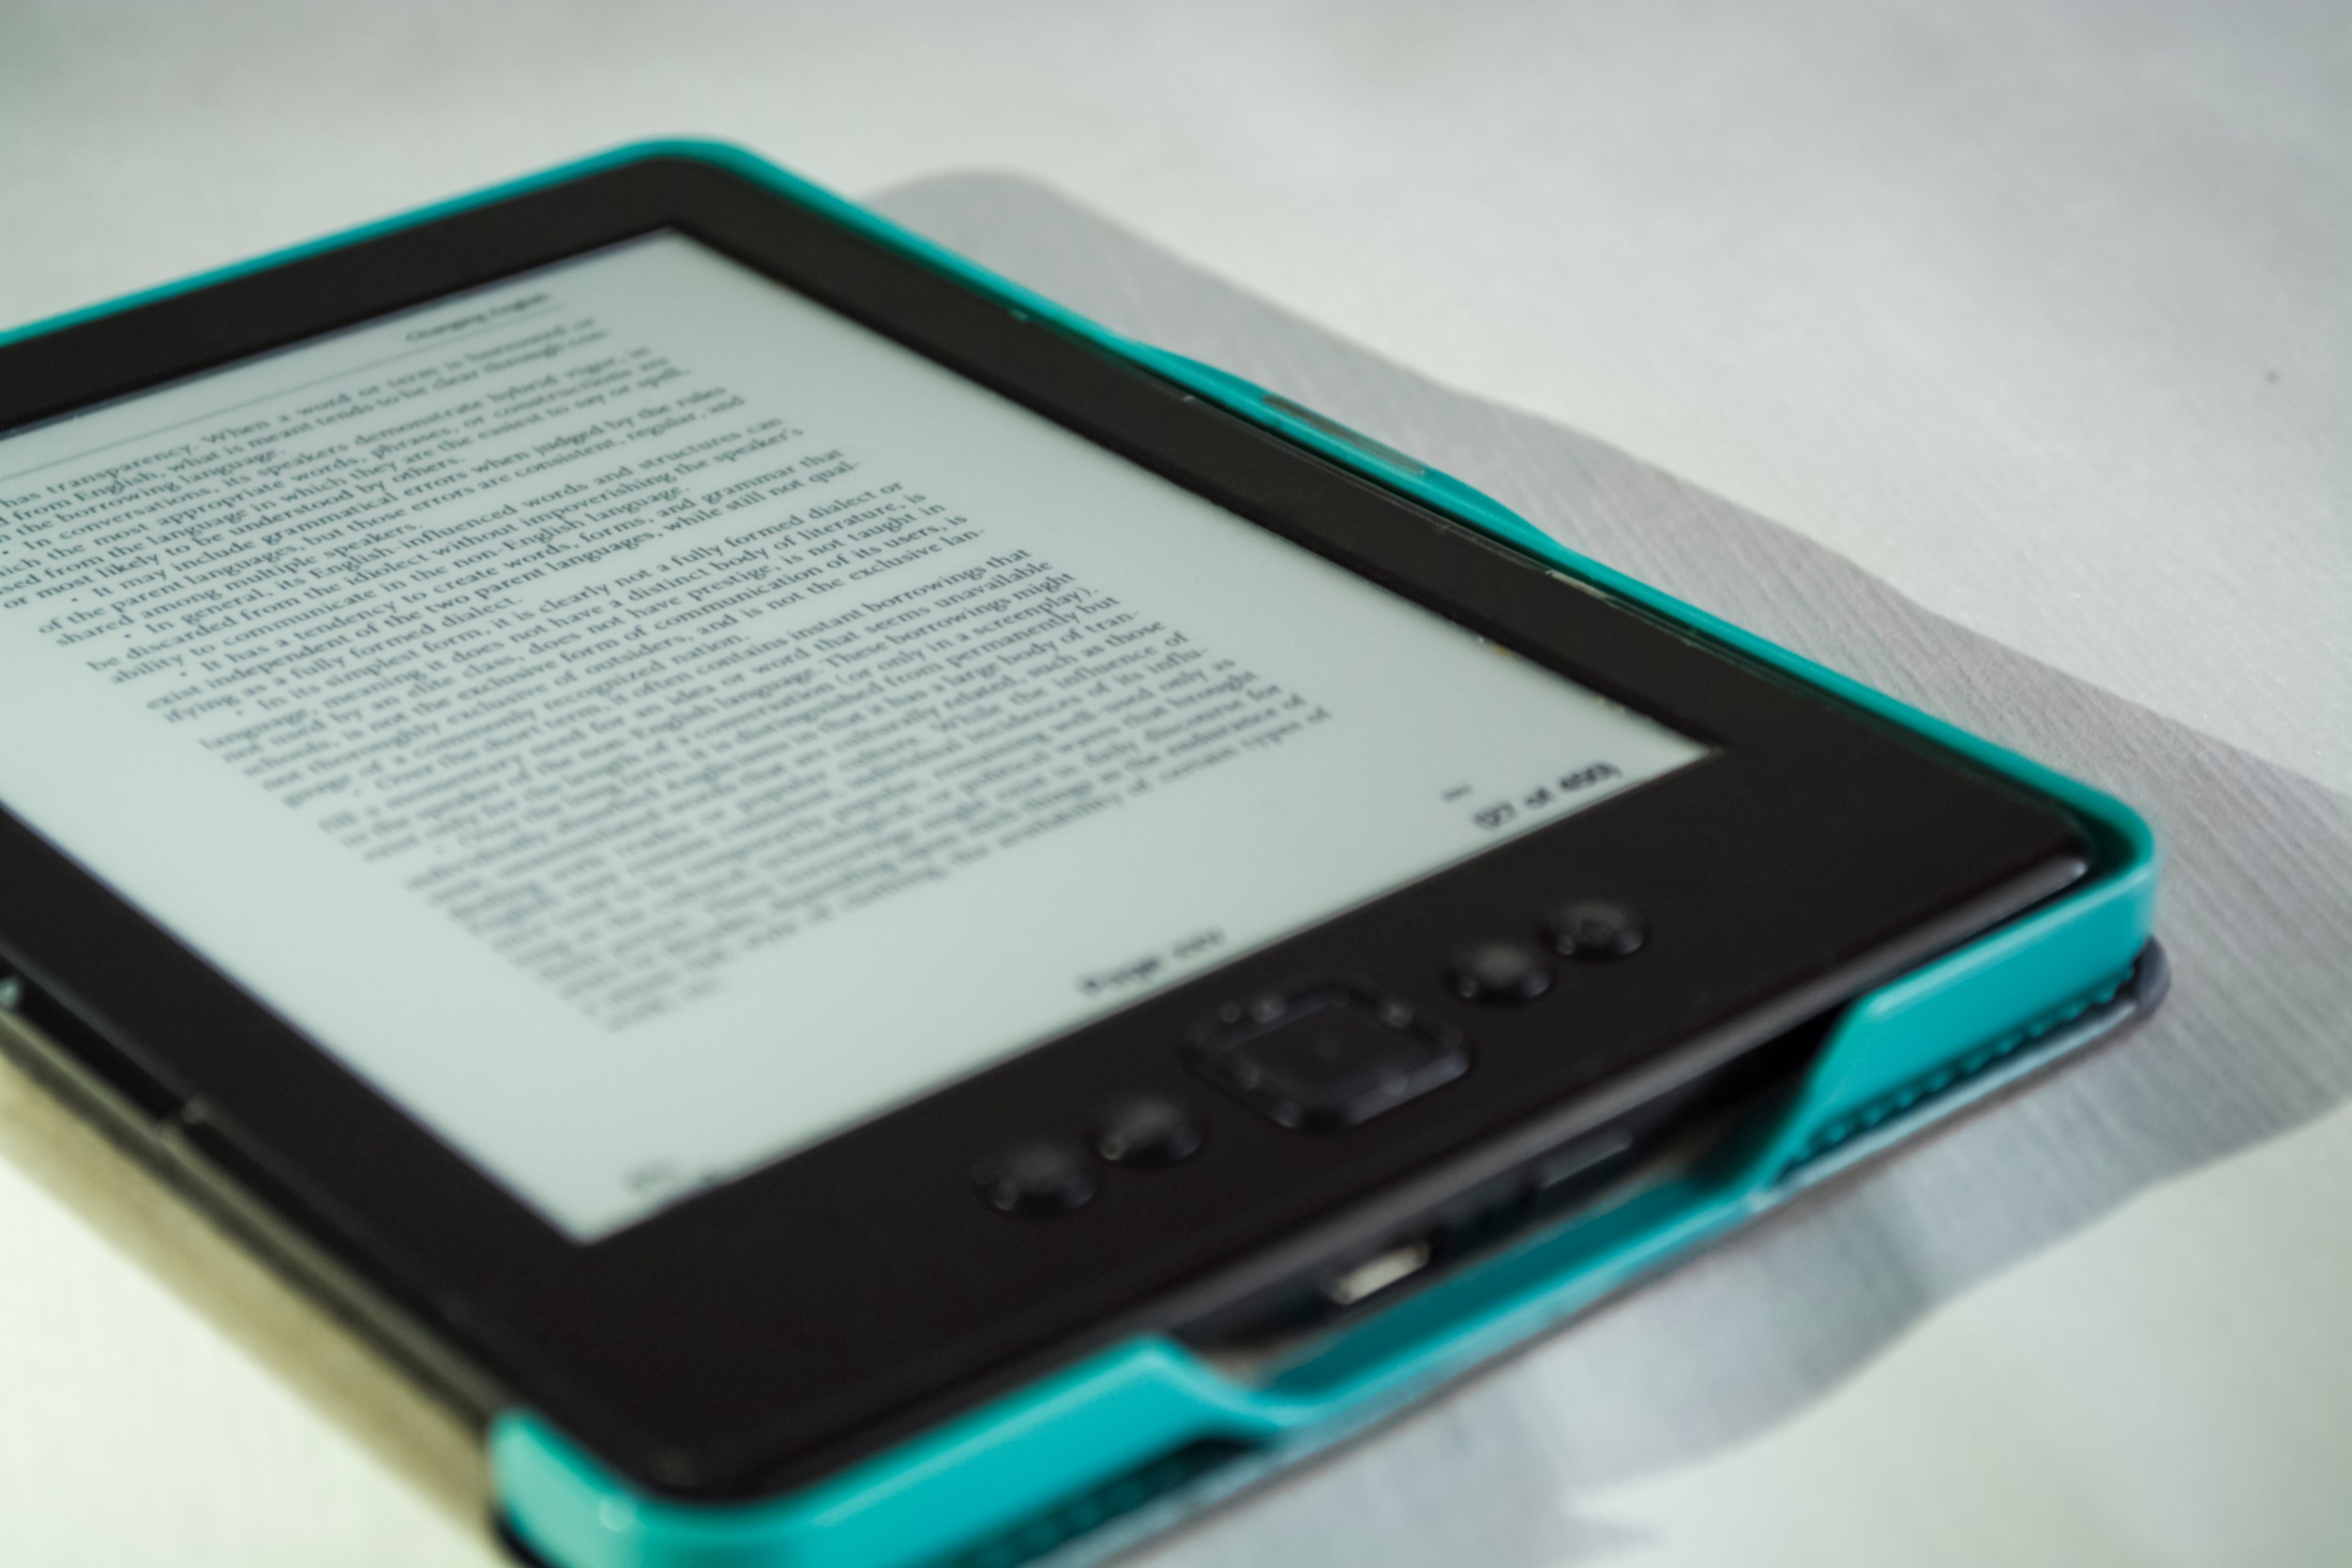 Where Can I Get My Kindle E-Reader Repaired?